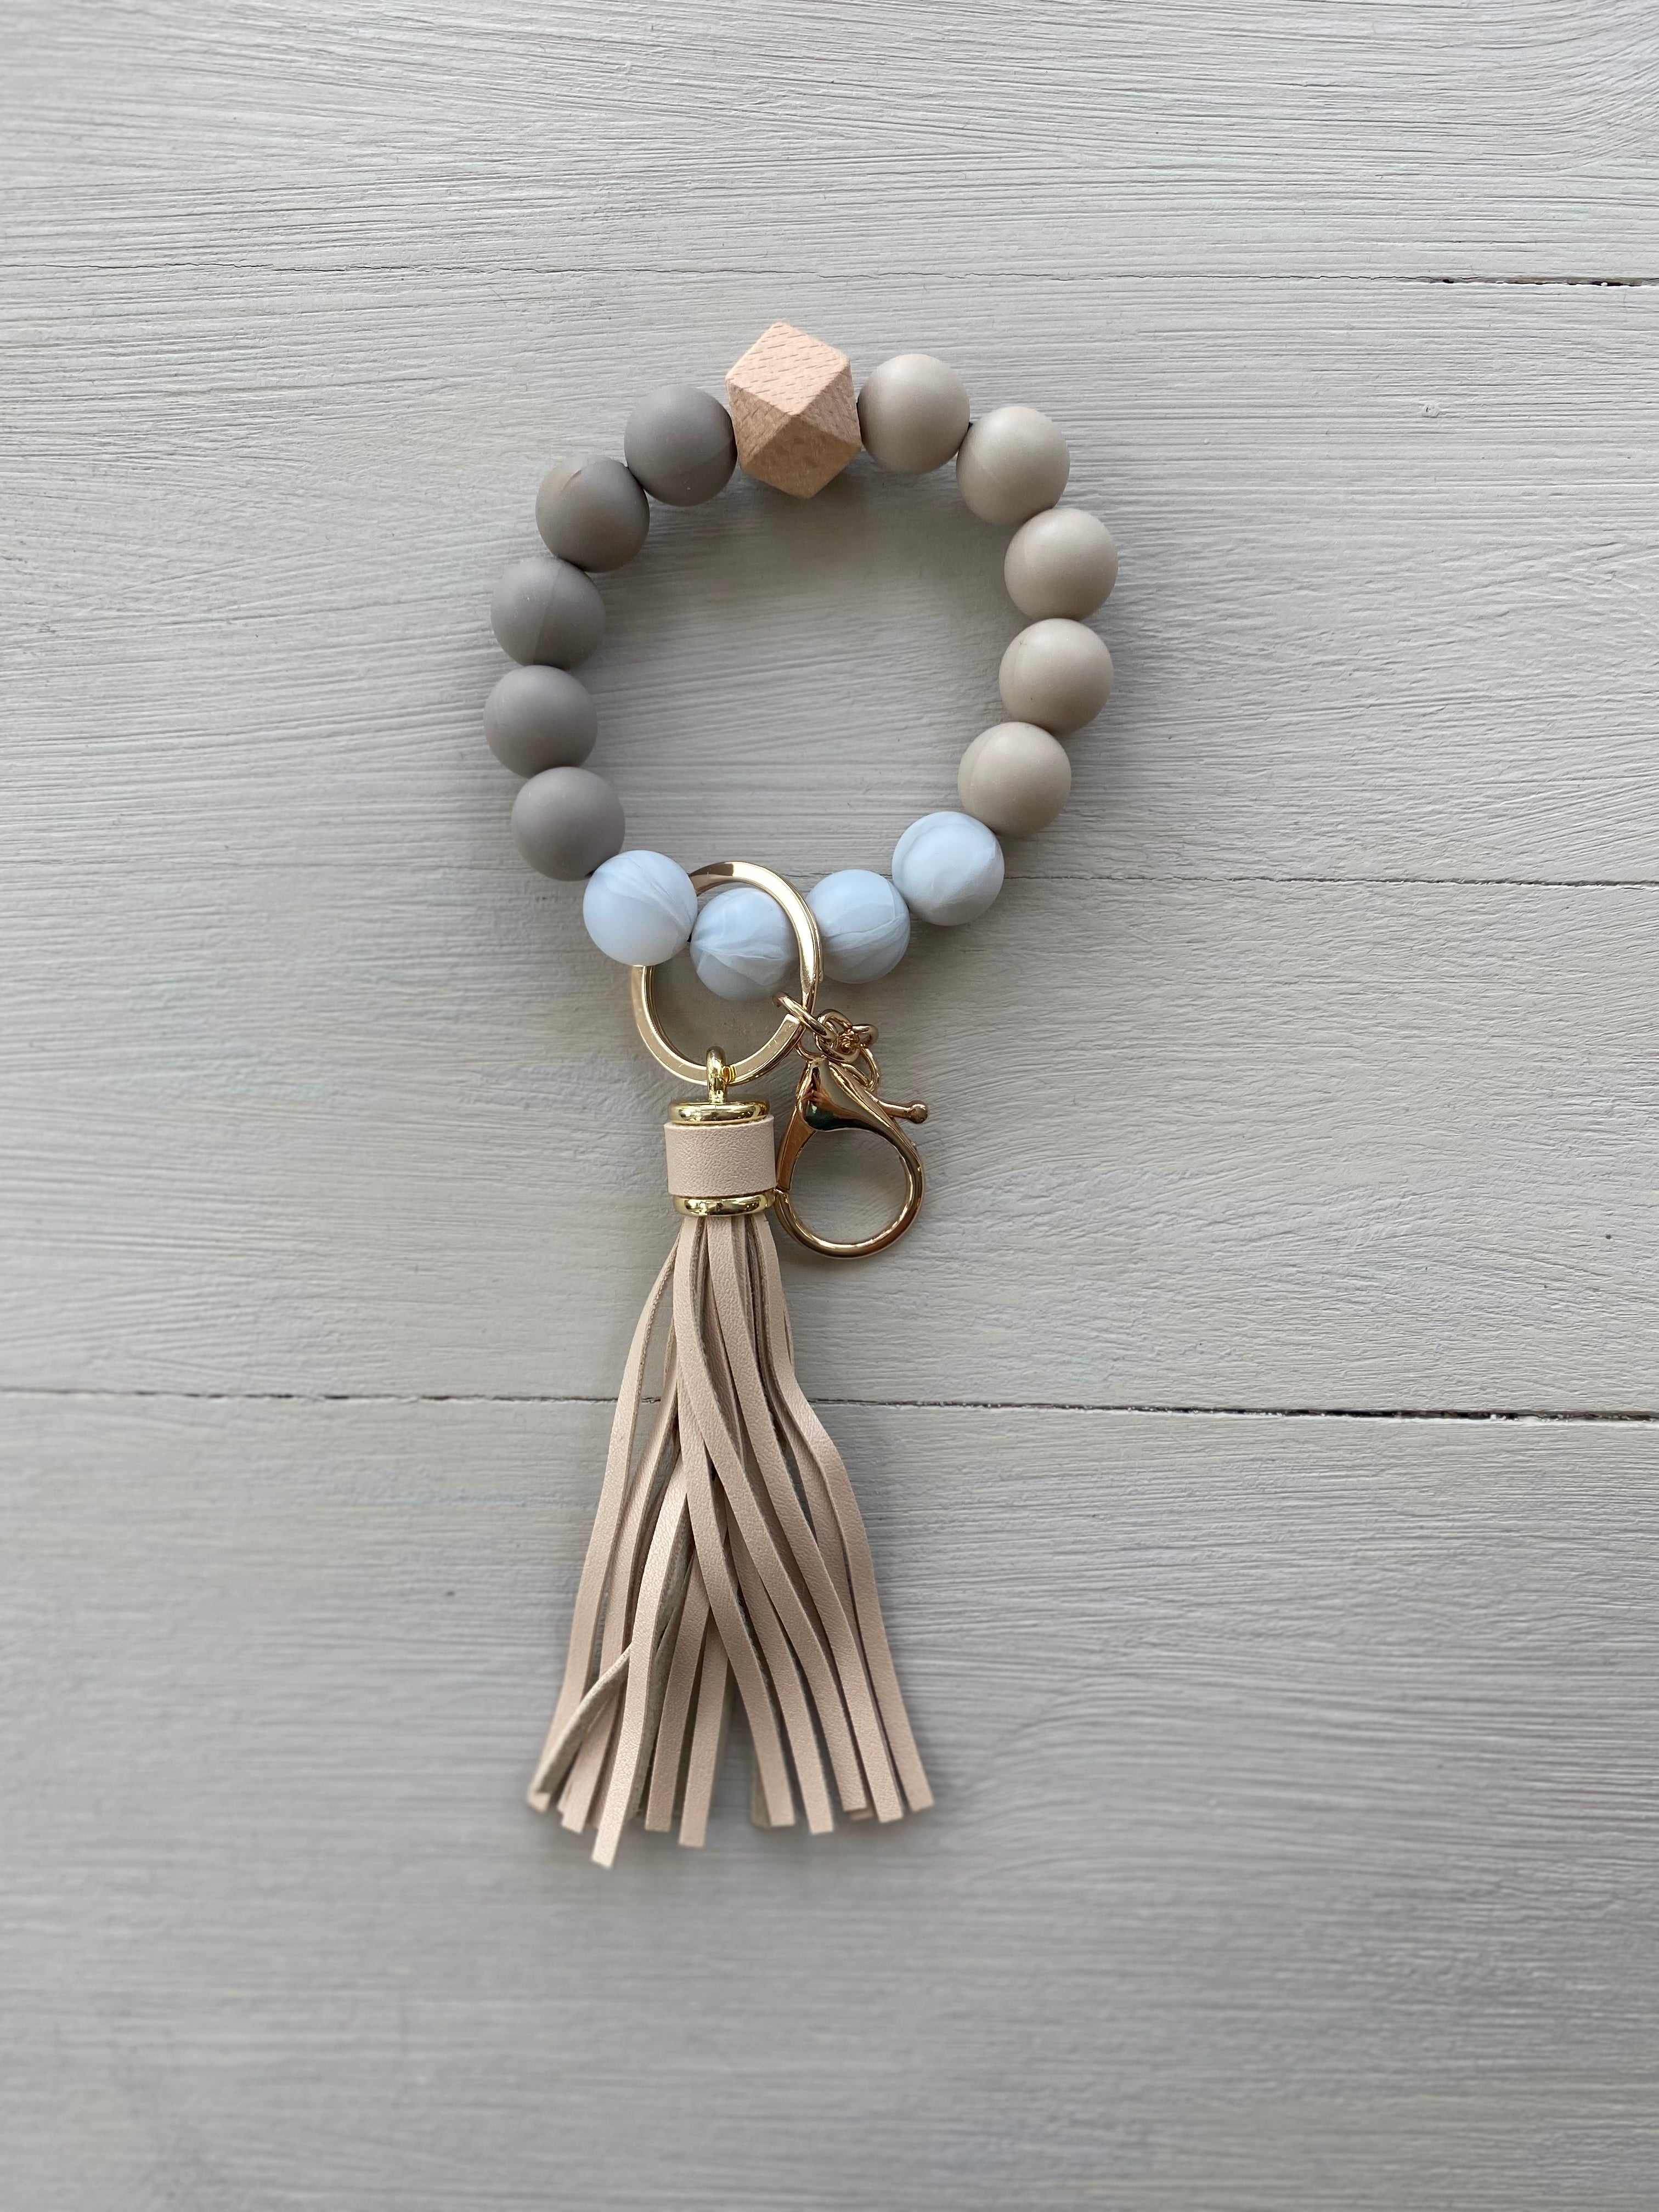 SVF Soft Grey and Grey Marble Silicone Wristlet Beaded Key Chain Bracelet with Tassel and Motivational Engraved Acrylic Charm of choice! (Copy) (Copy) The Mustard Seed Collection, The Seed